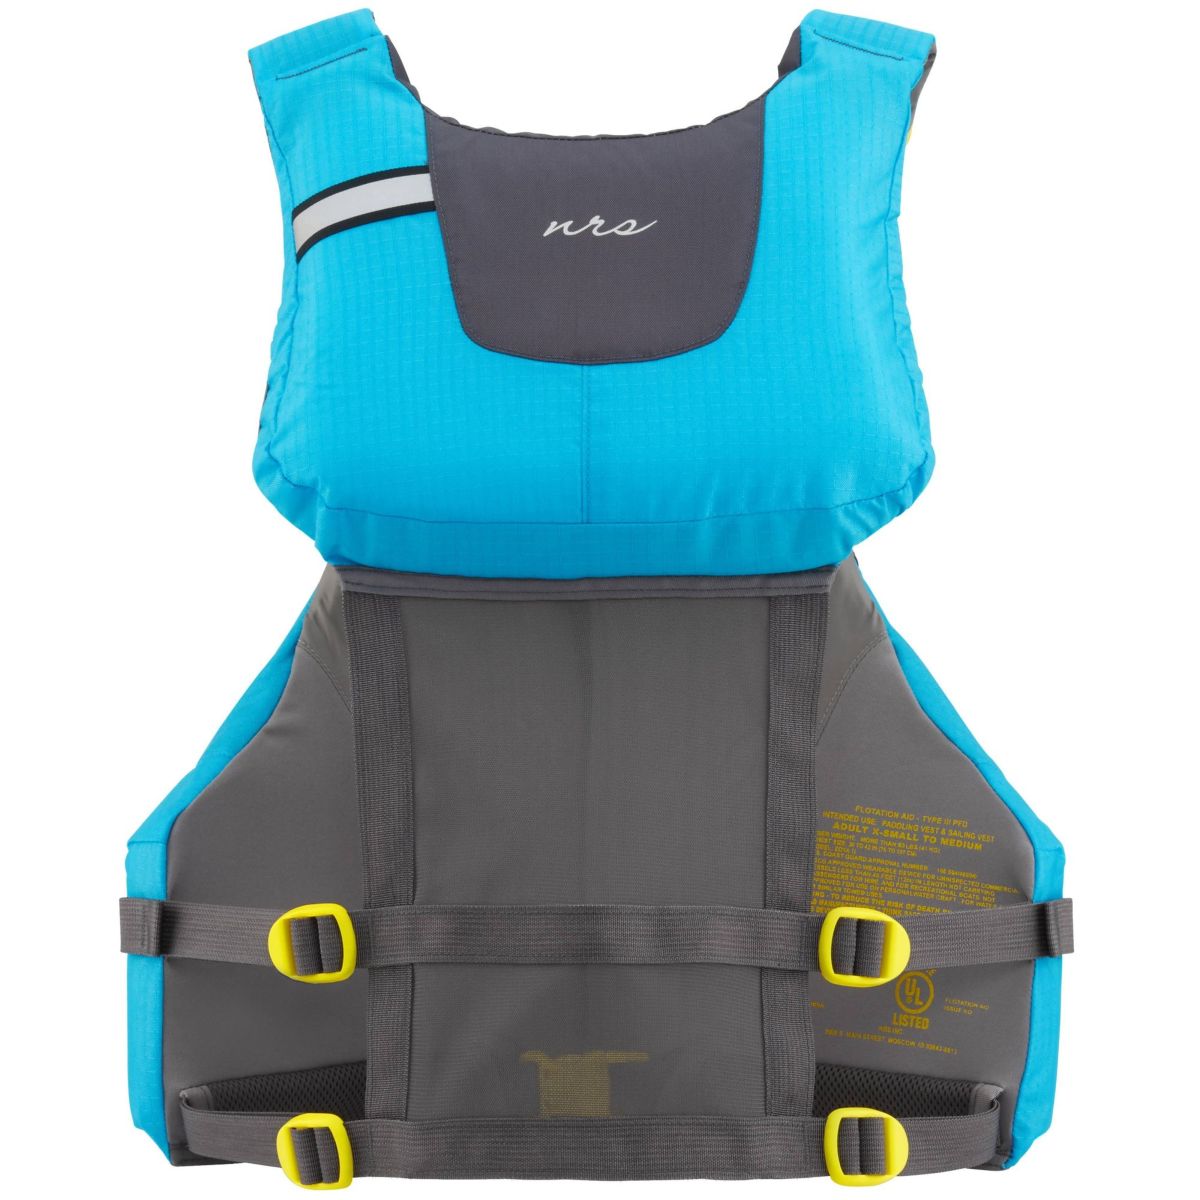 NRS Adult Unisex Adult Small Paddle Personal Flotation Device in